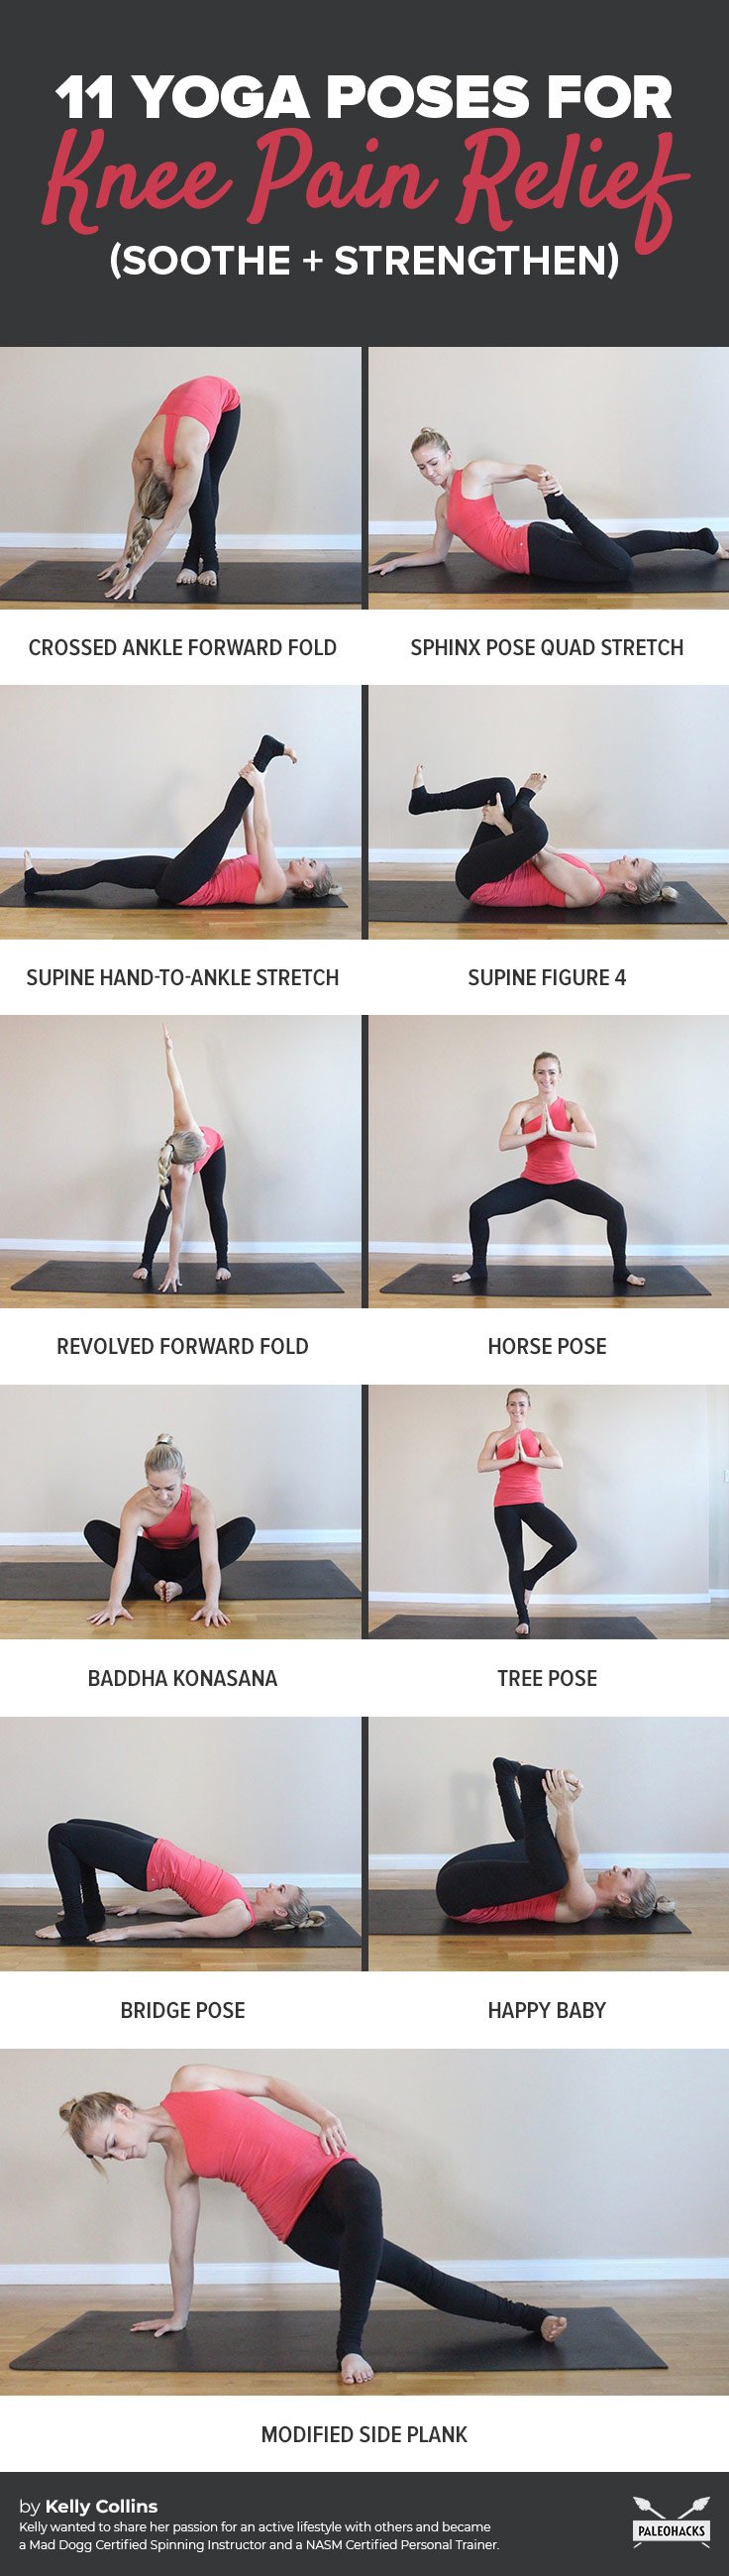 Suffering from achy, painful knees? Try these soothing yoga poses to strengthen your knees and melt away pain.